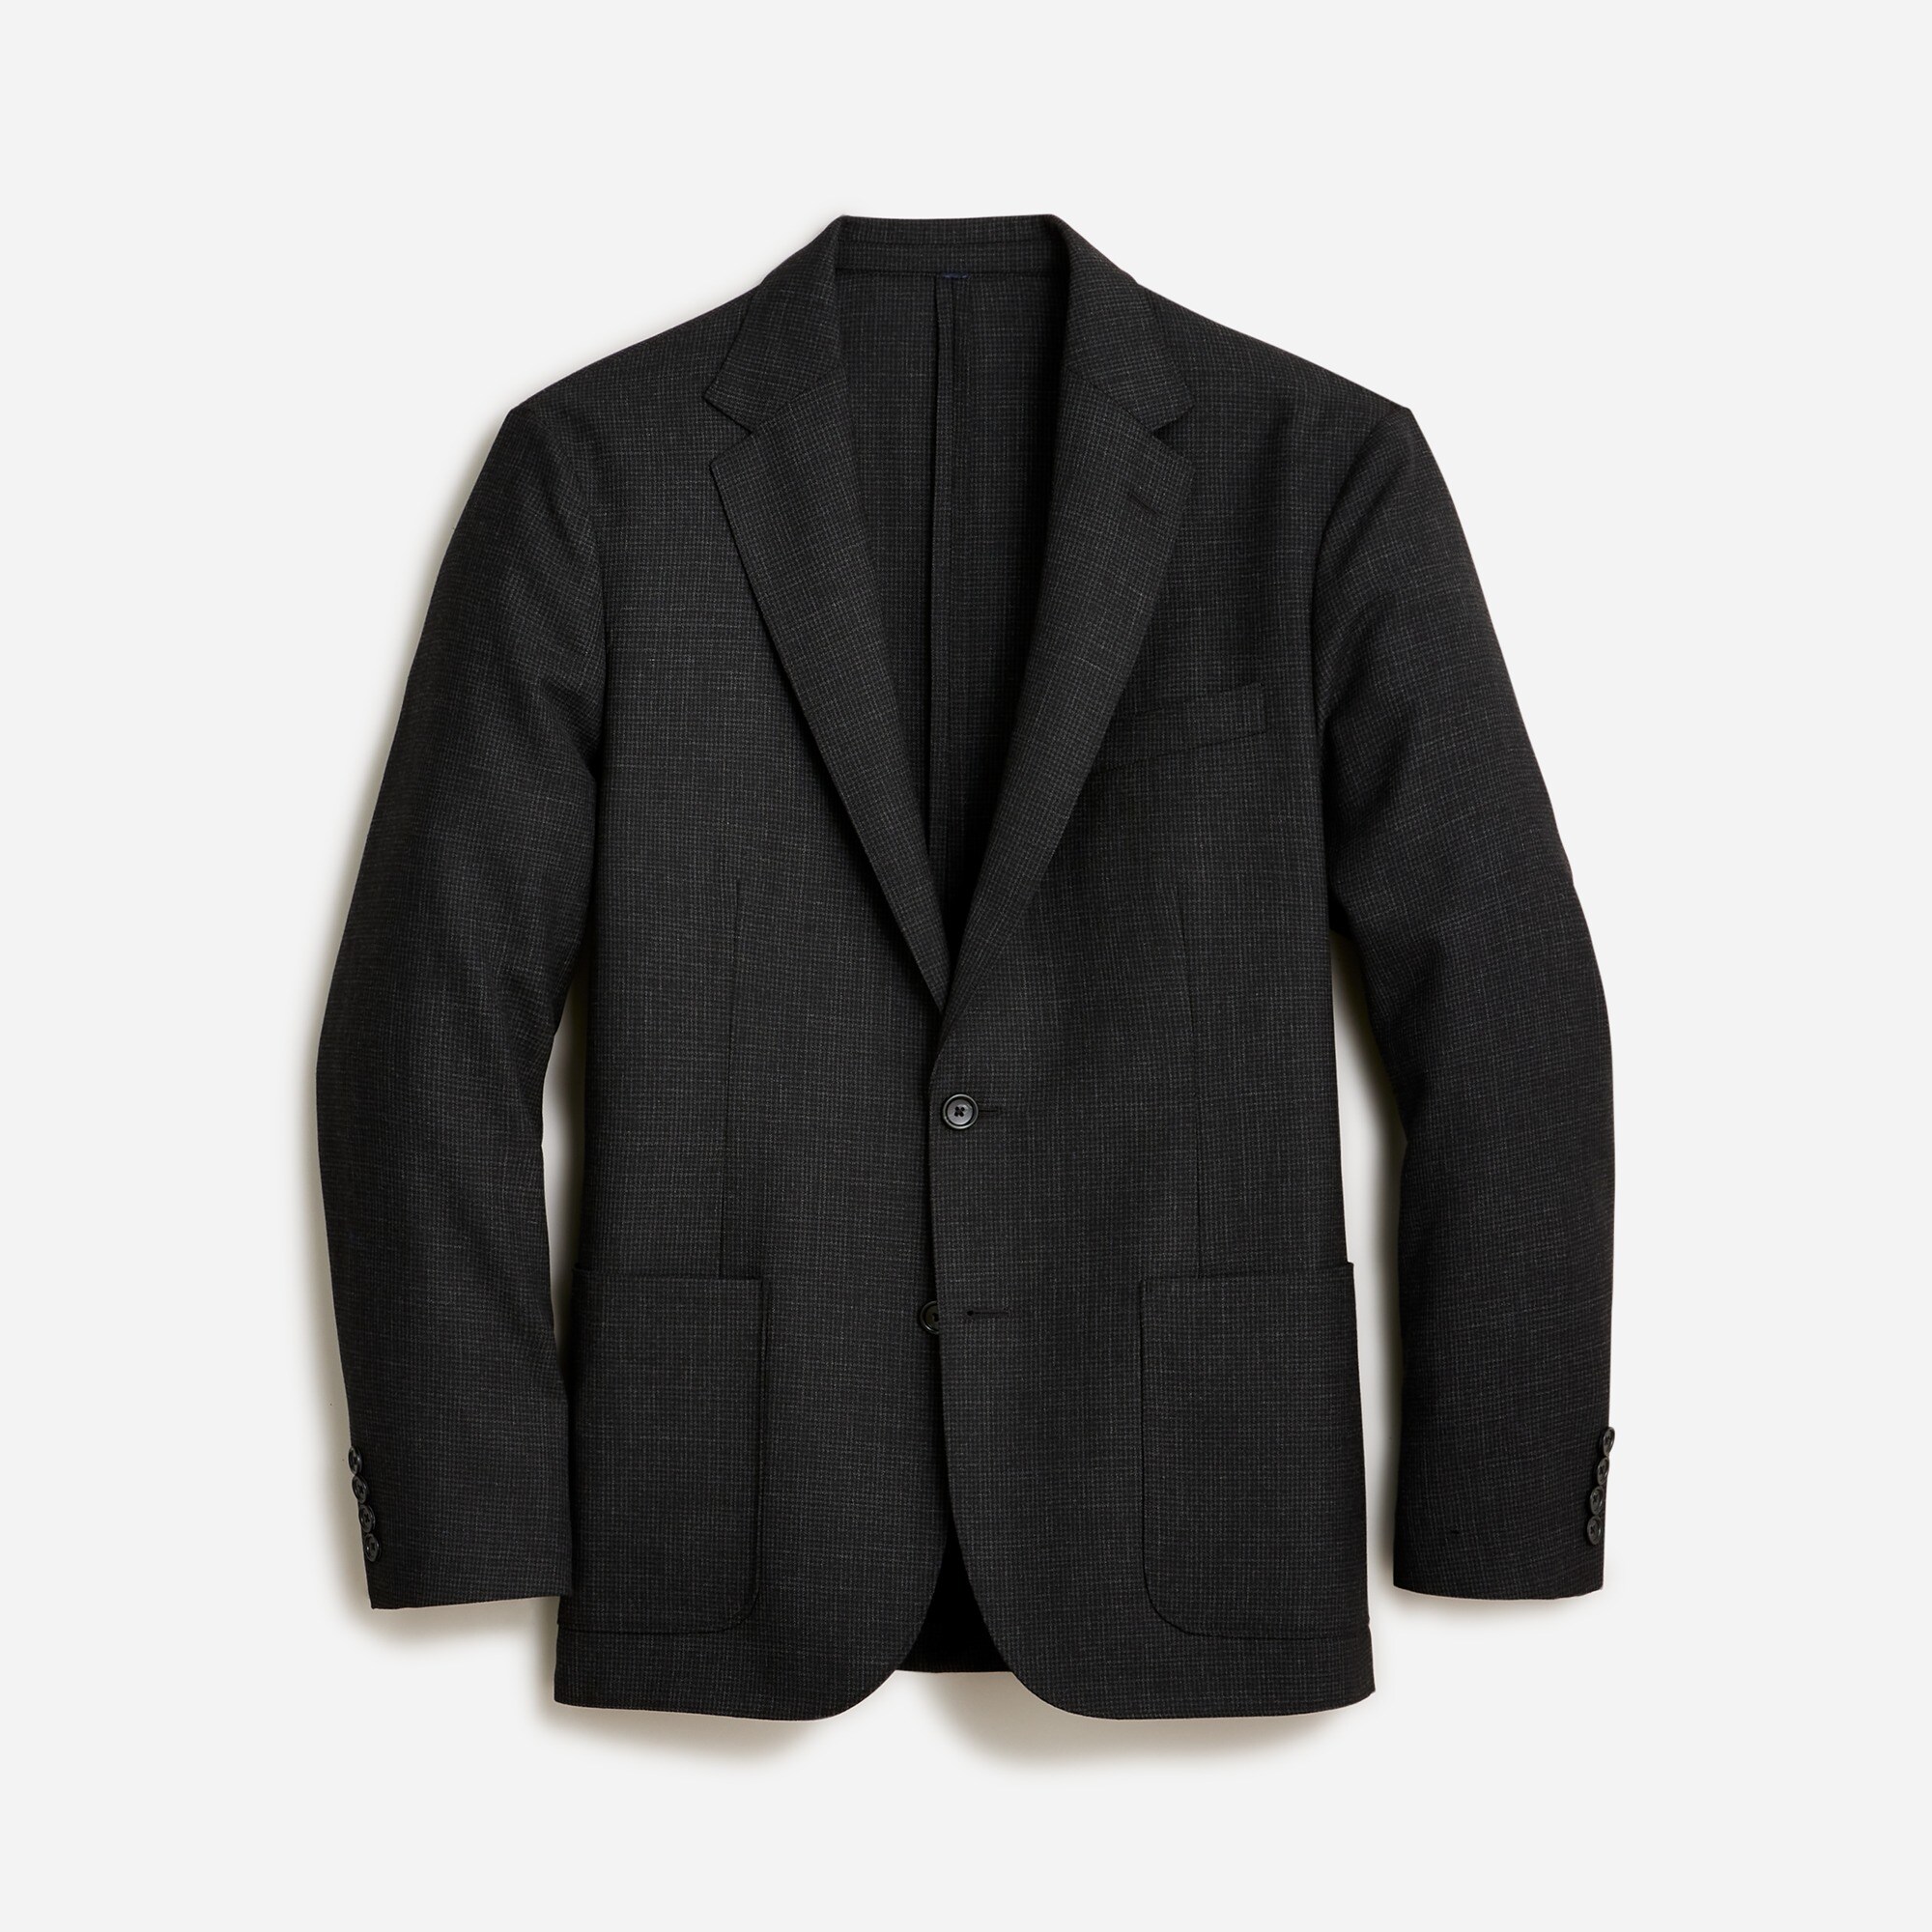  Crosby Classic-fit suit jacket in English wool